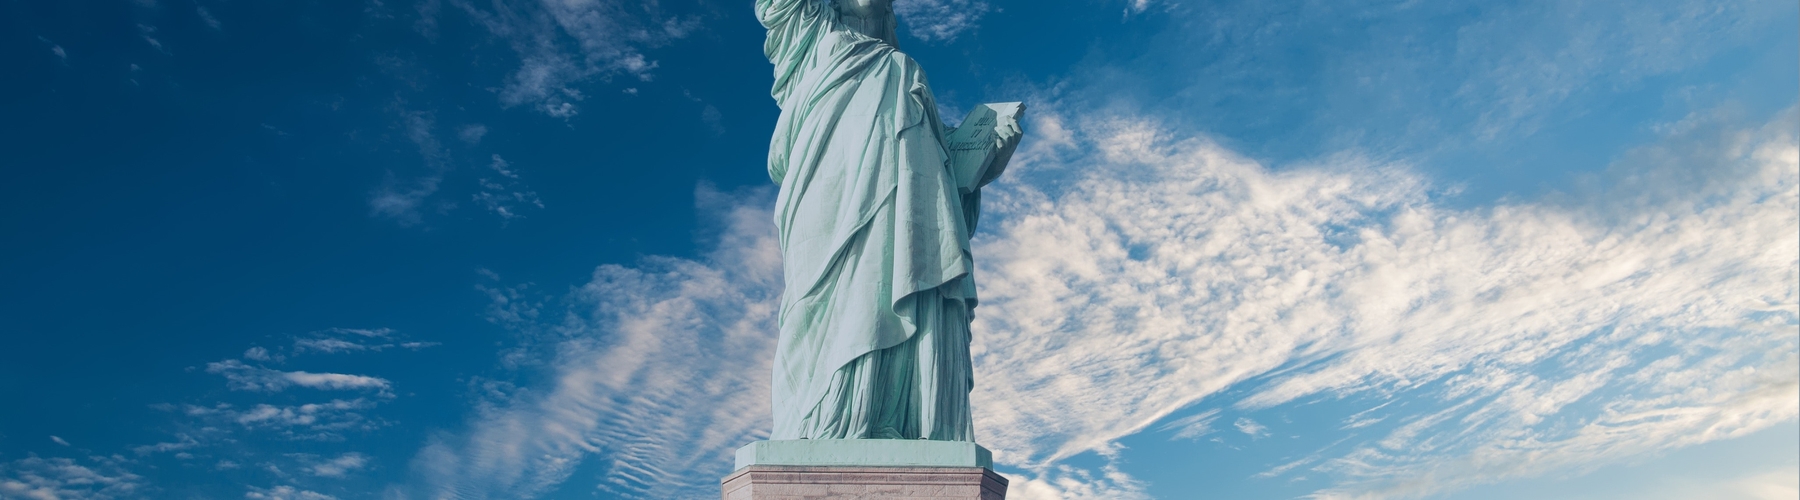 United States of America - statue of liberty